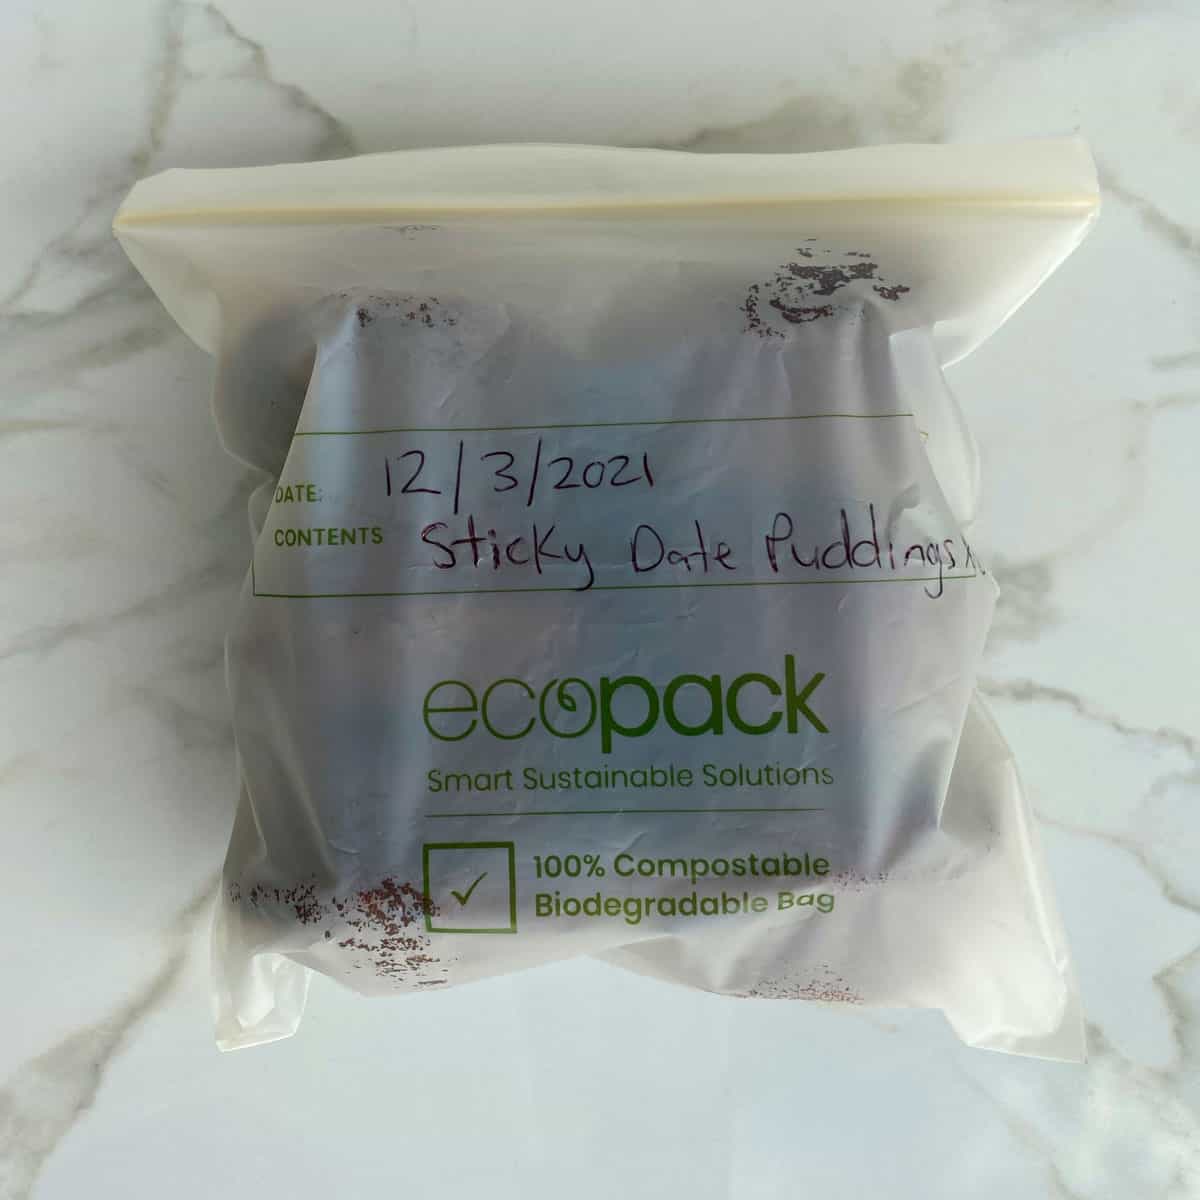 Mini sticky date puddings in a freezer bag on a white bench.